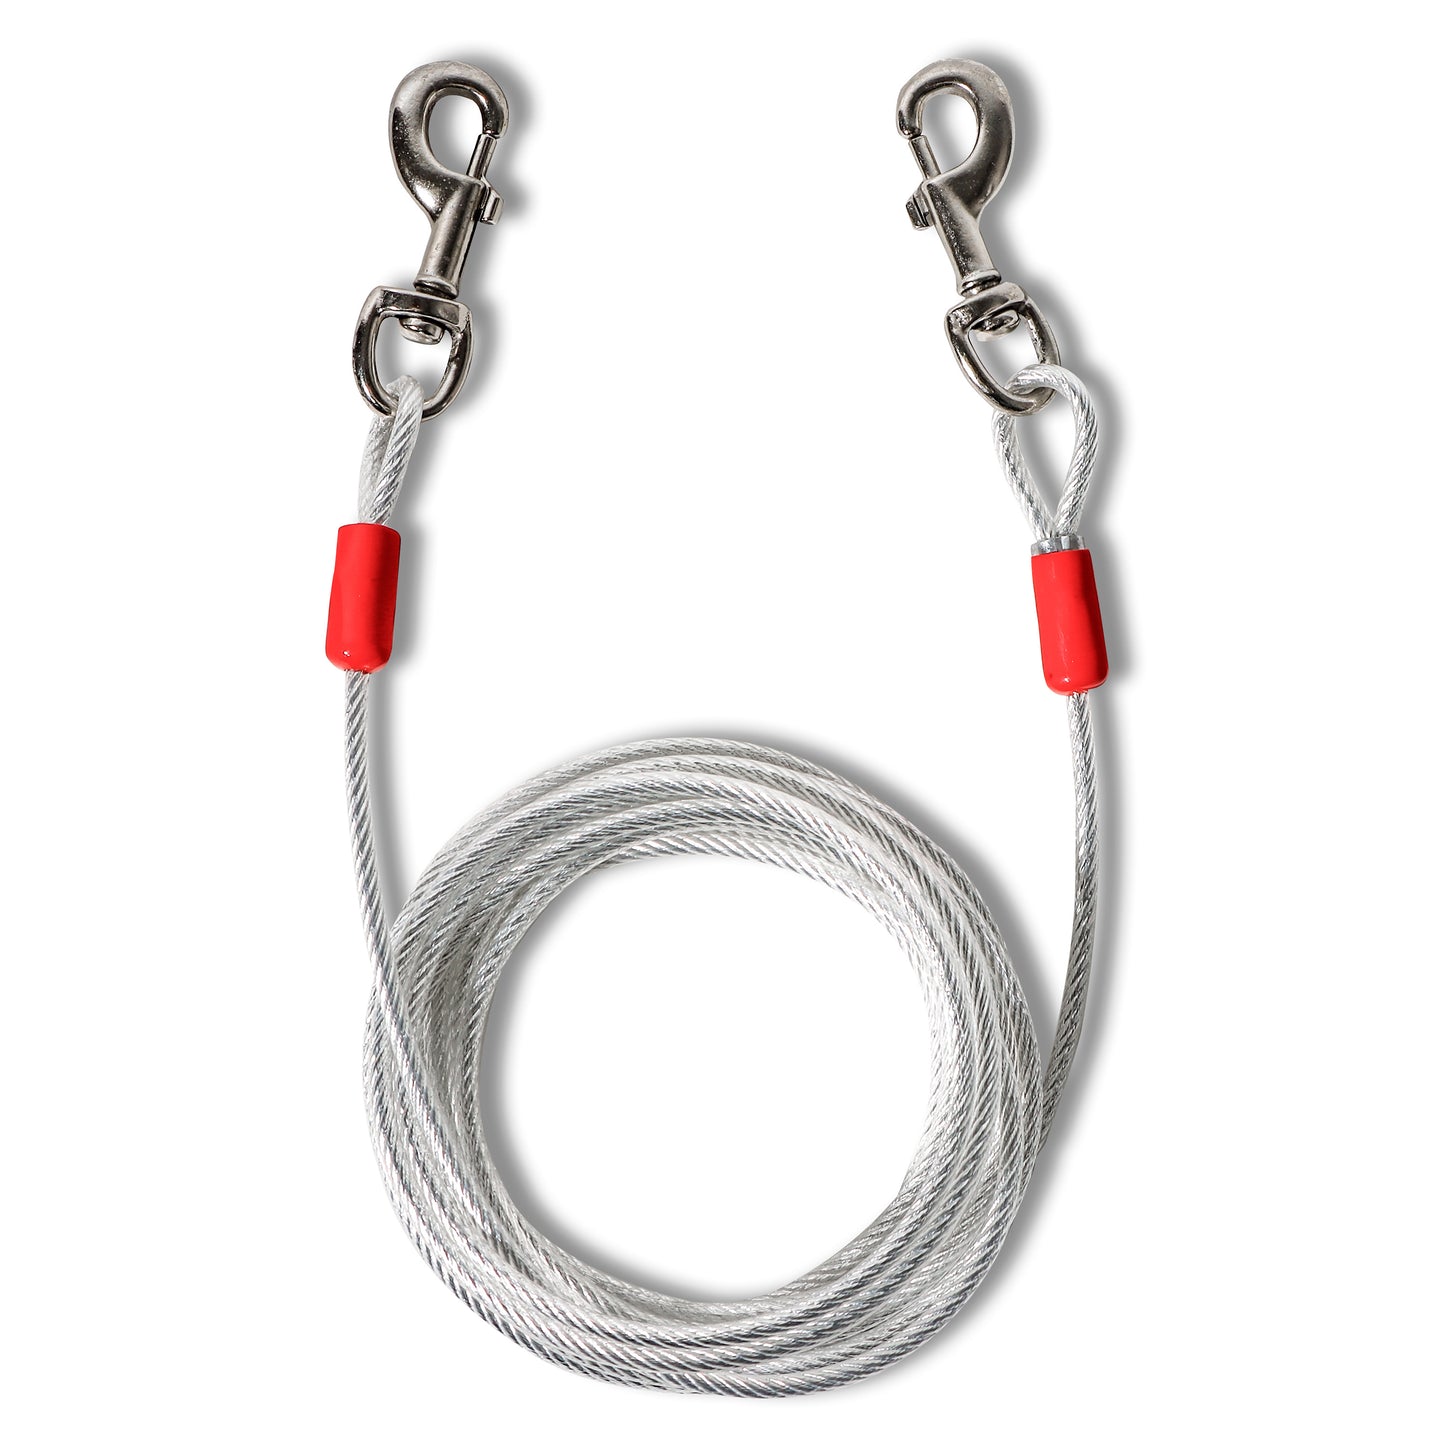 30 Foot Heavy Duty Tie-Out Cable